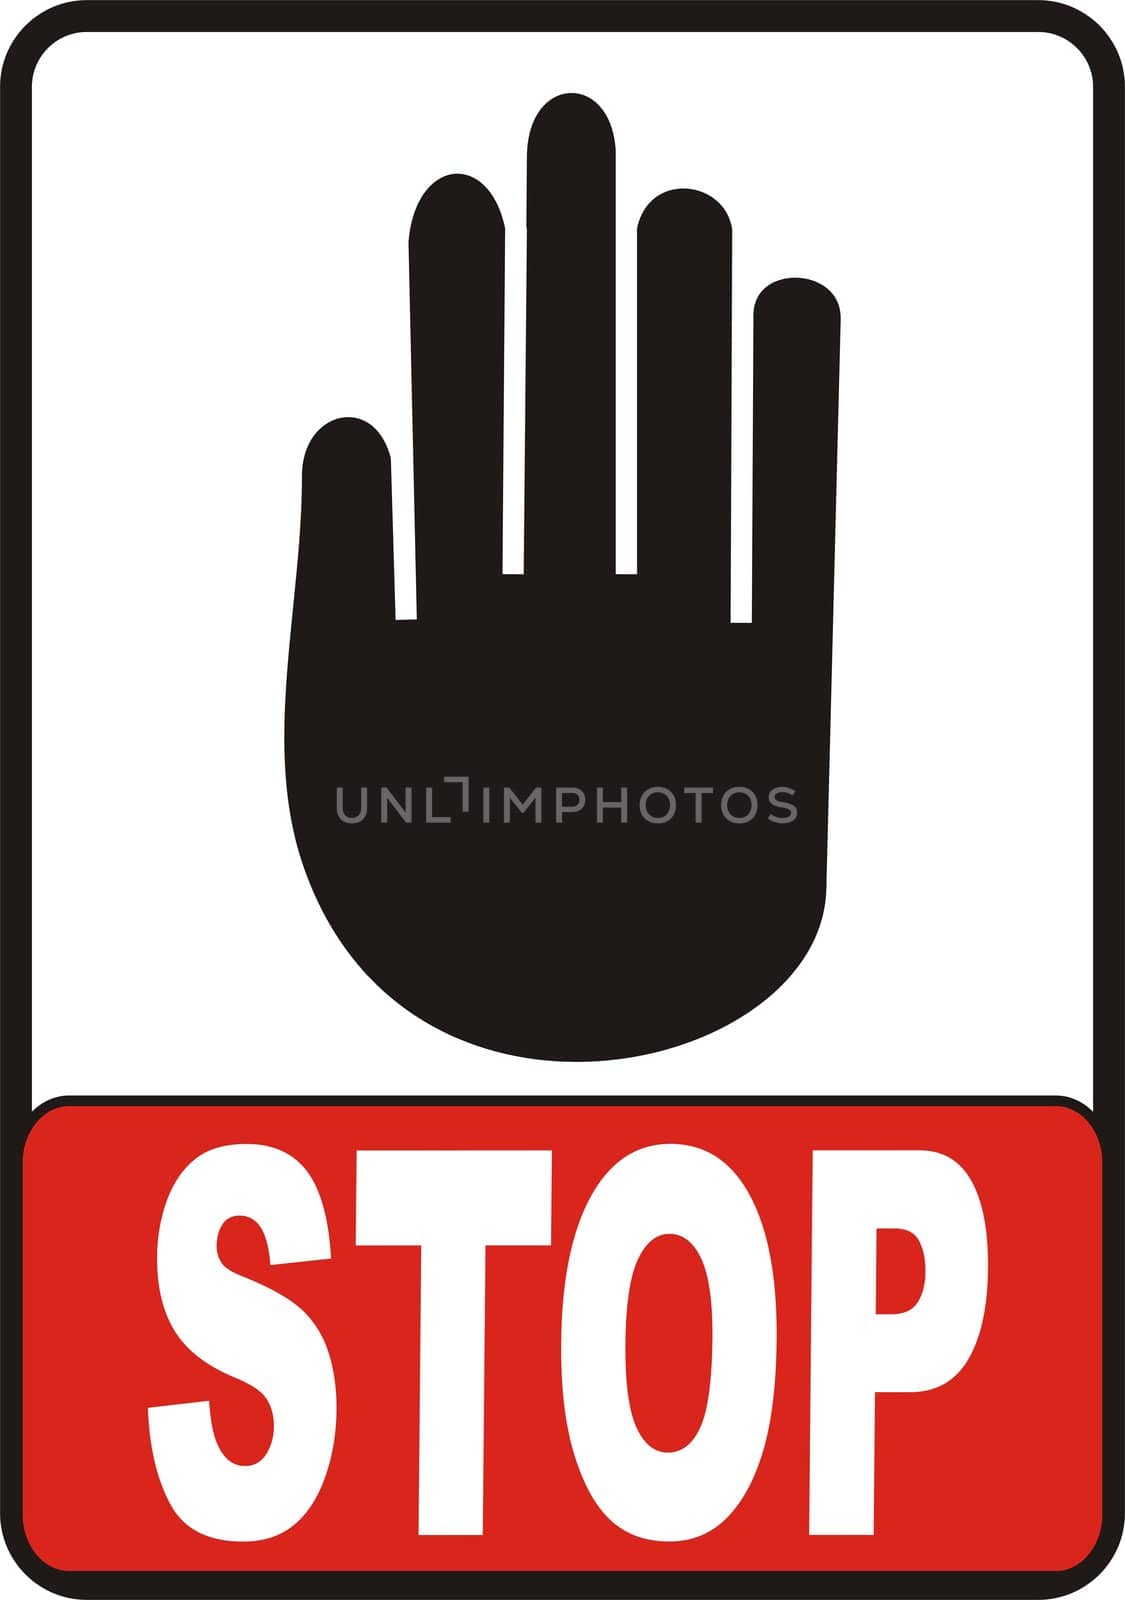 Hand With Stop Sign vectorial image isolated on white